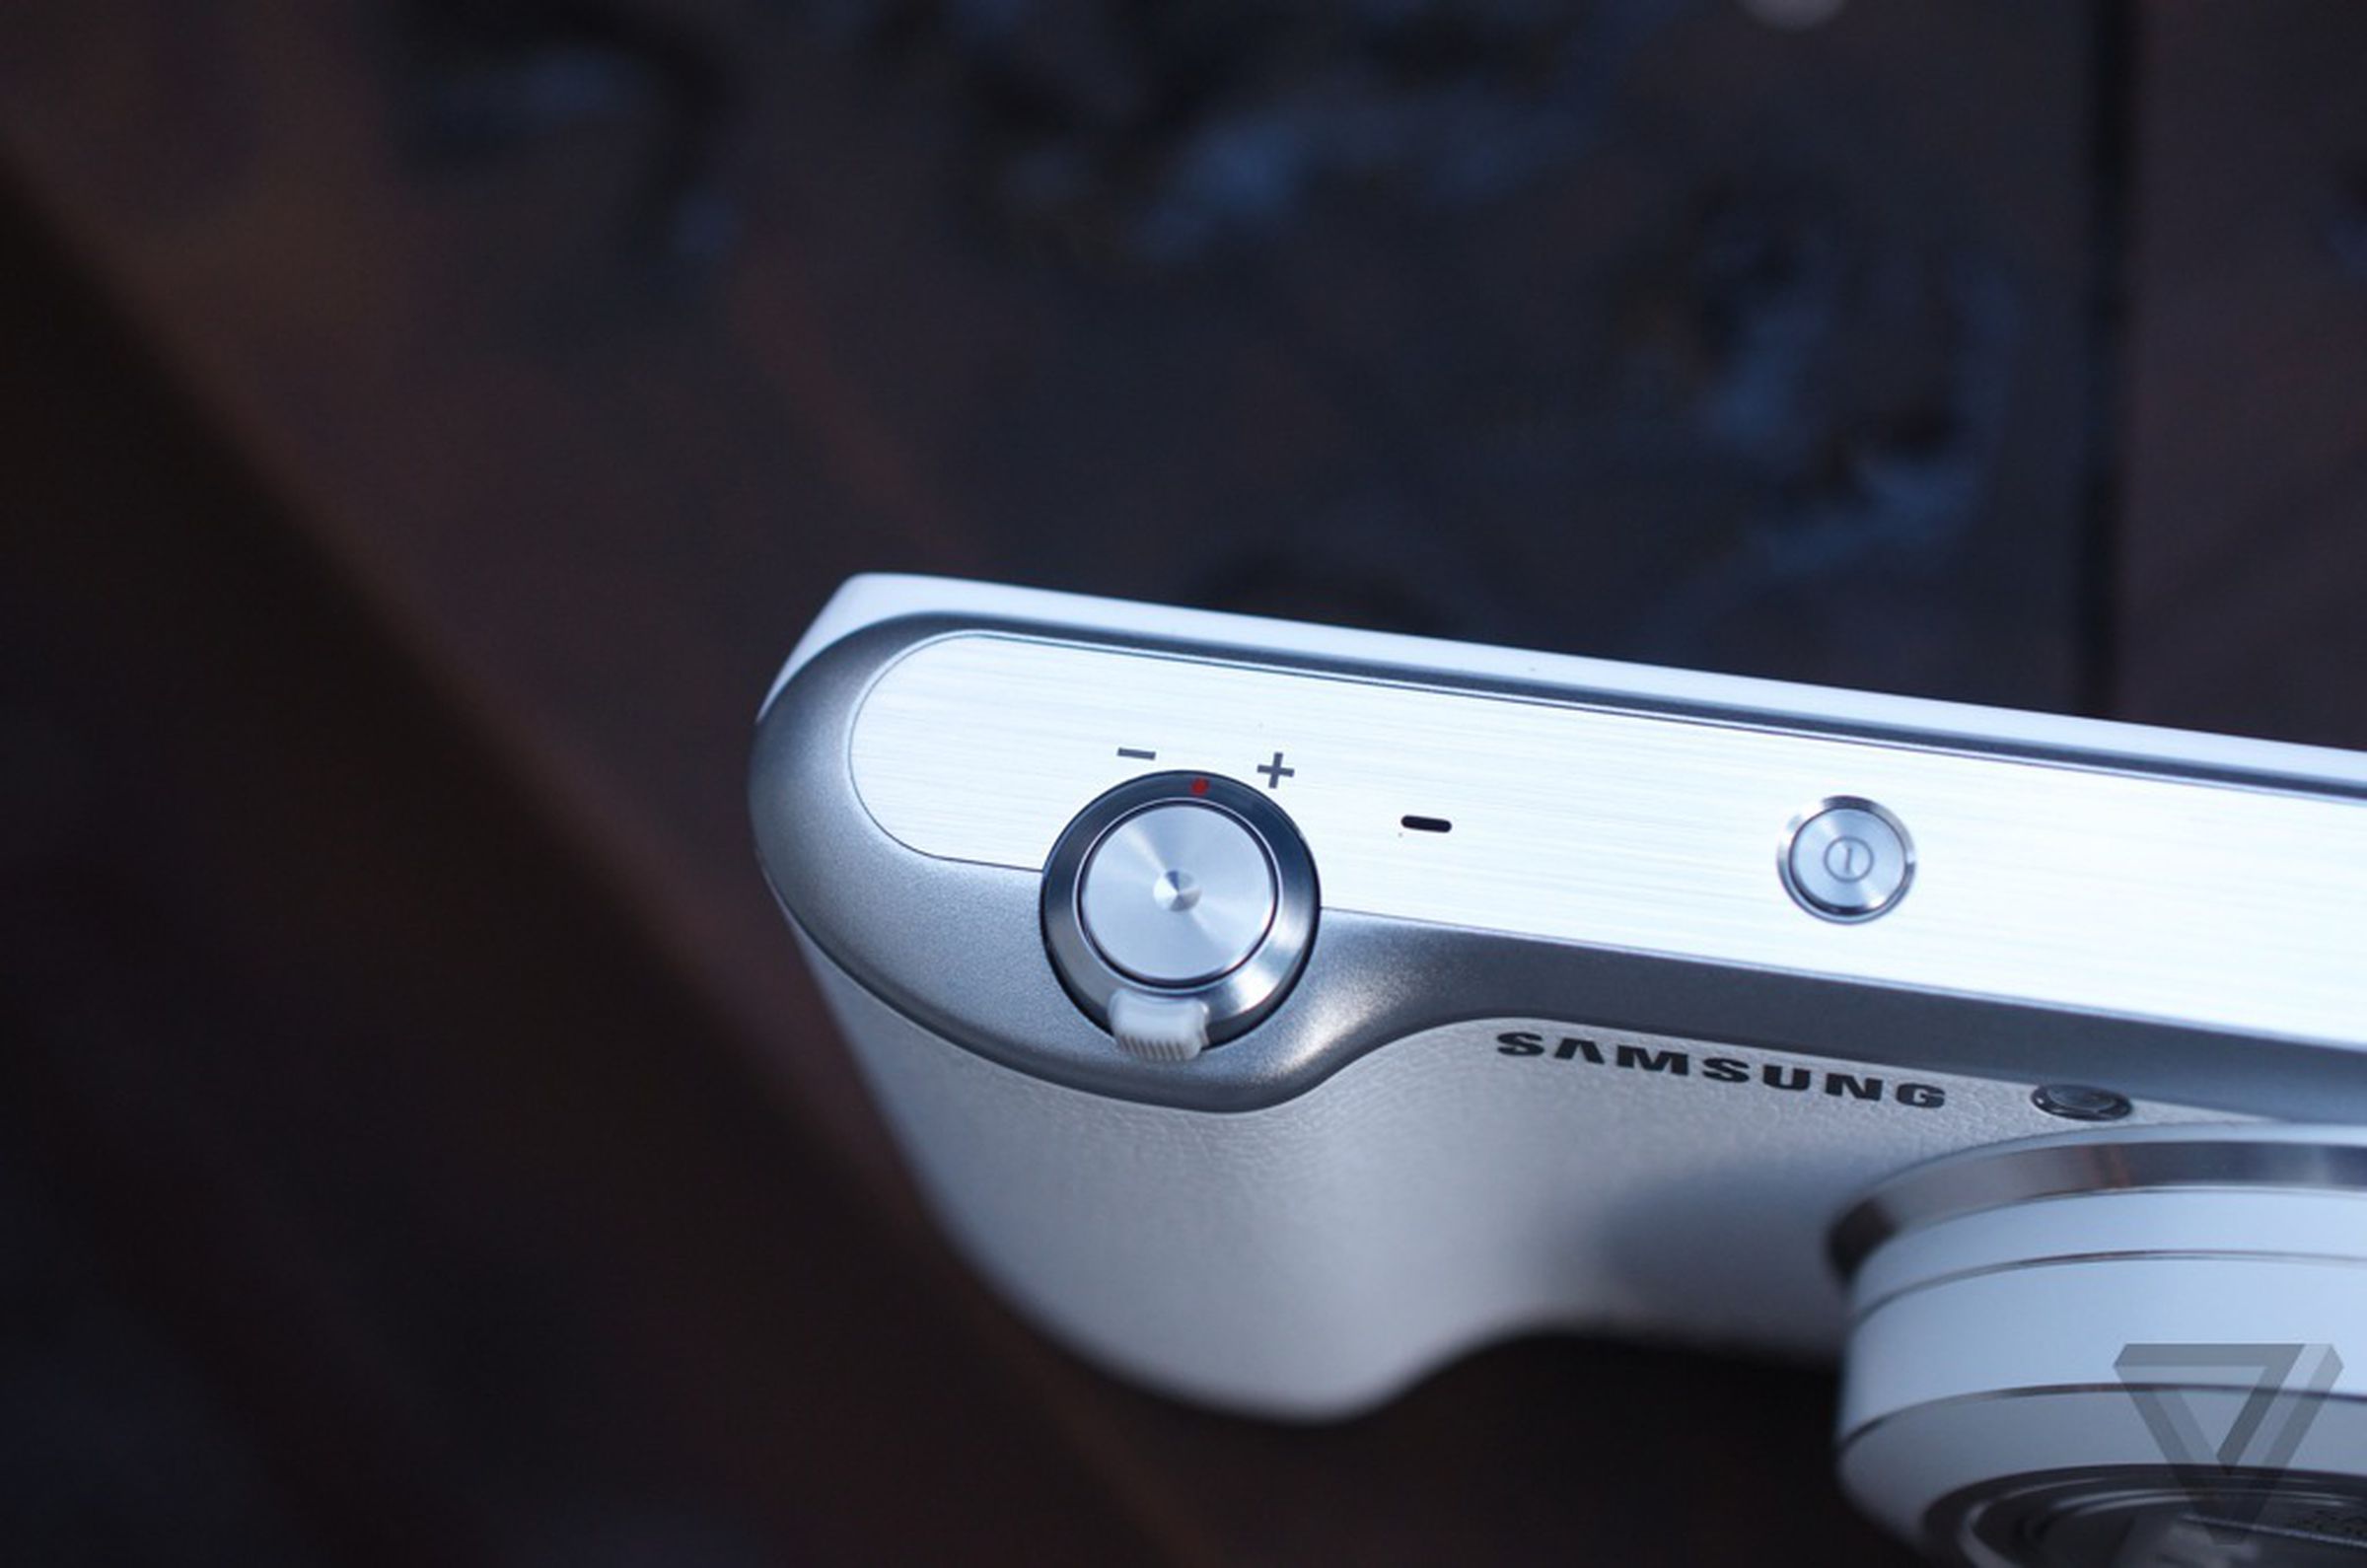 Samsung Galaxy Camera 2 hands-on pictures